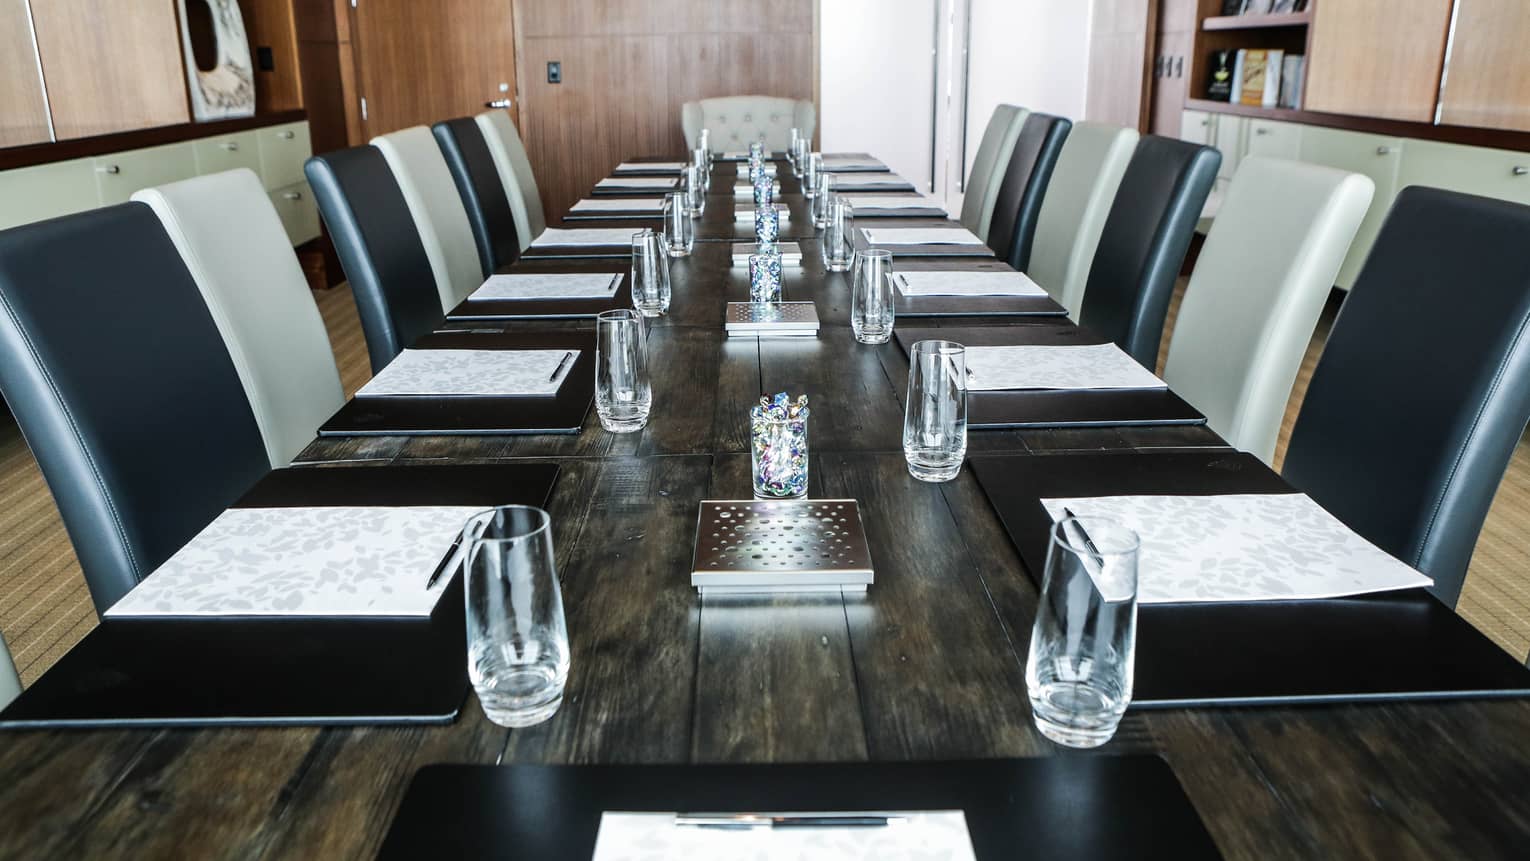 River North boardroom meeting table and leather chairs